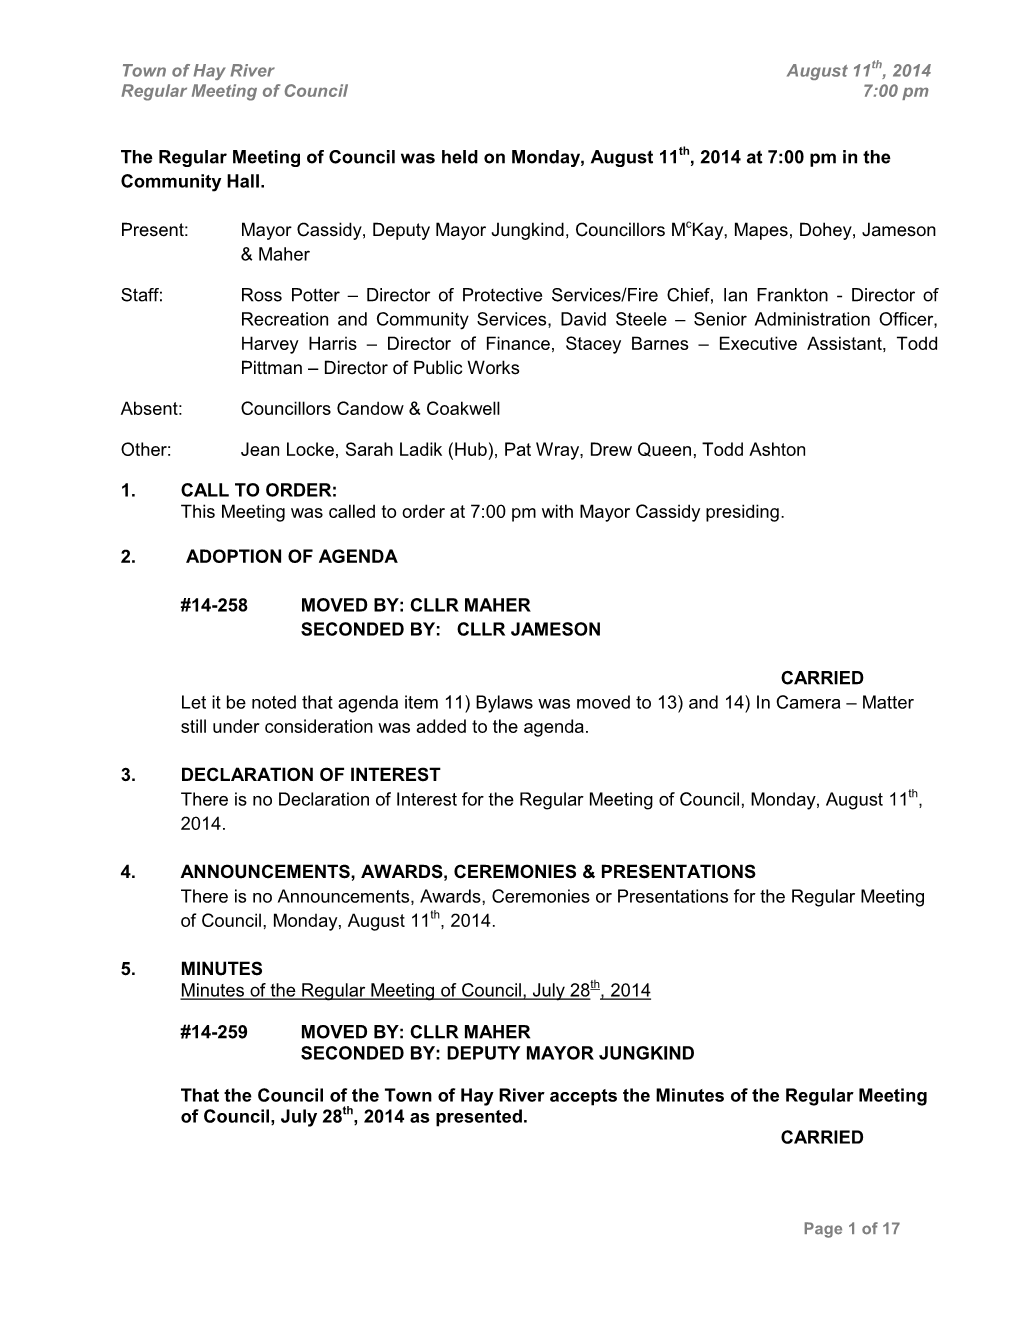 The Regular Meeting of Council Was Held on Monday, August 11Th, 2014 at 7:00 Pm in the Community Hall. Present: Mayor Cassidy, D